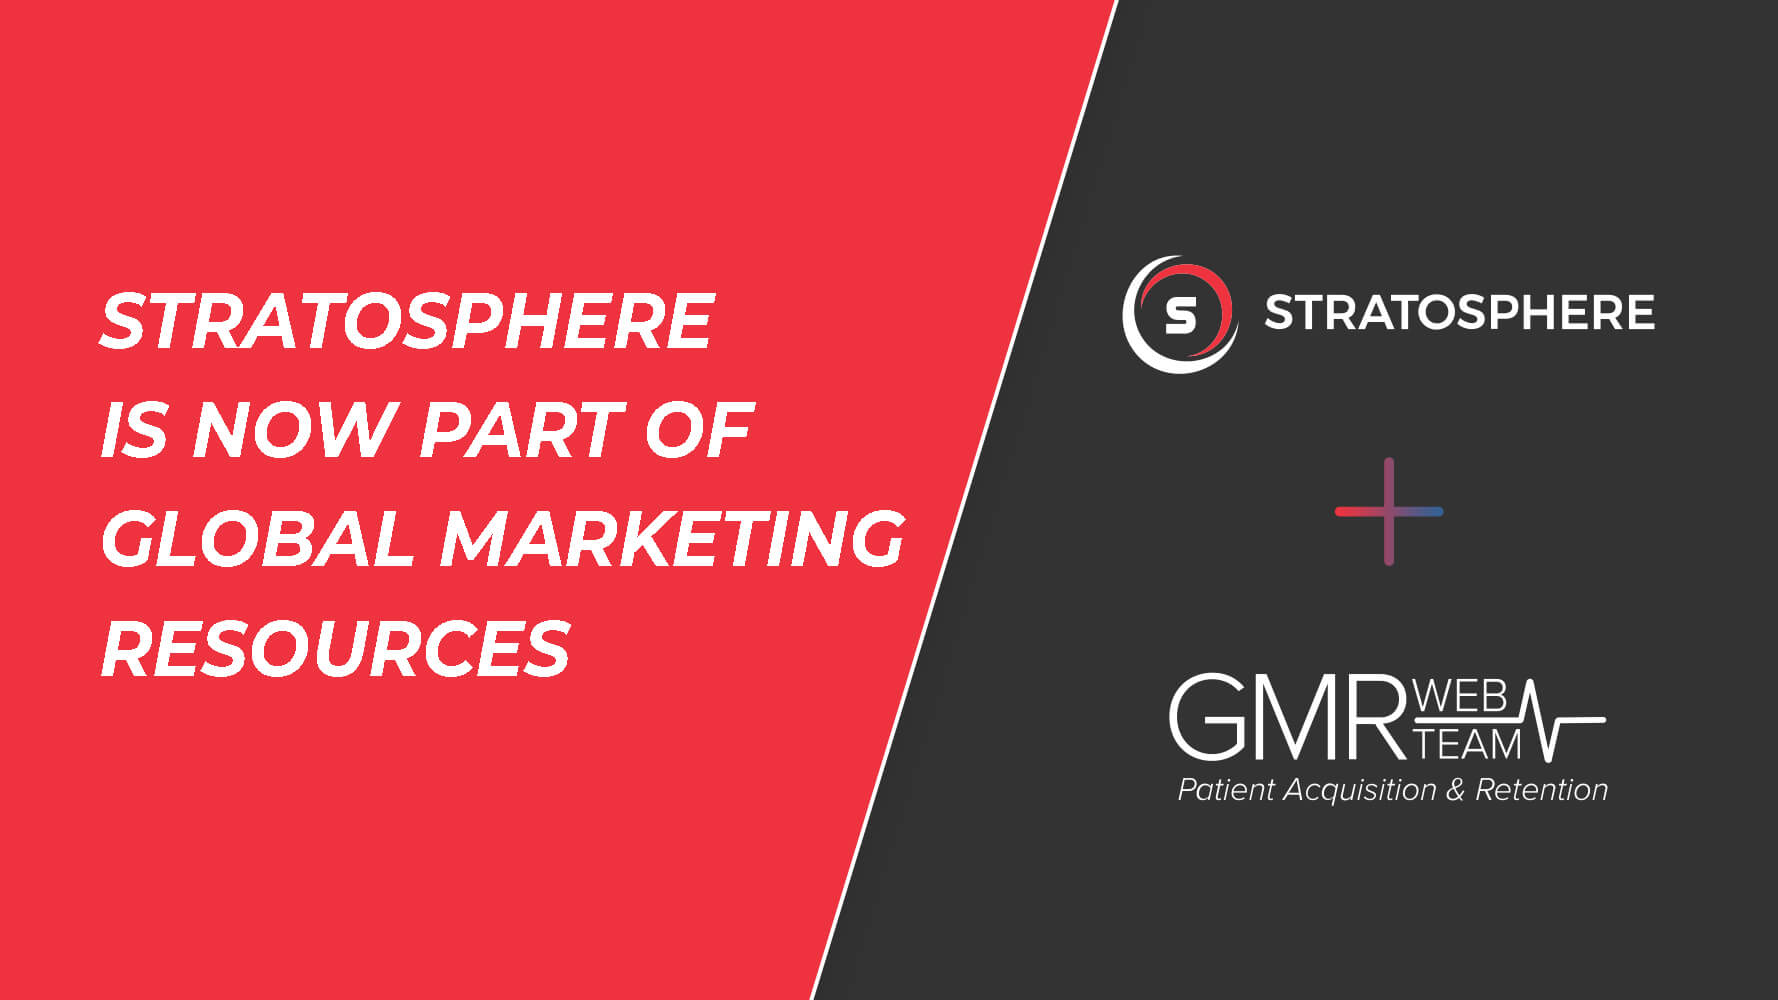 Stratosphere Has Been Acquired by Global Marketing Resources (GMR) to Strengthen Its Position in the Insurance Marketing Industry